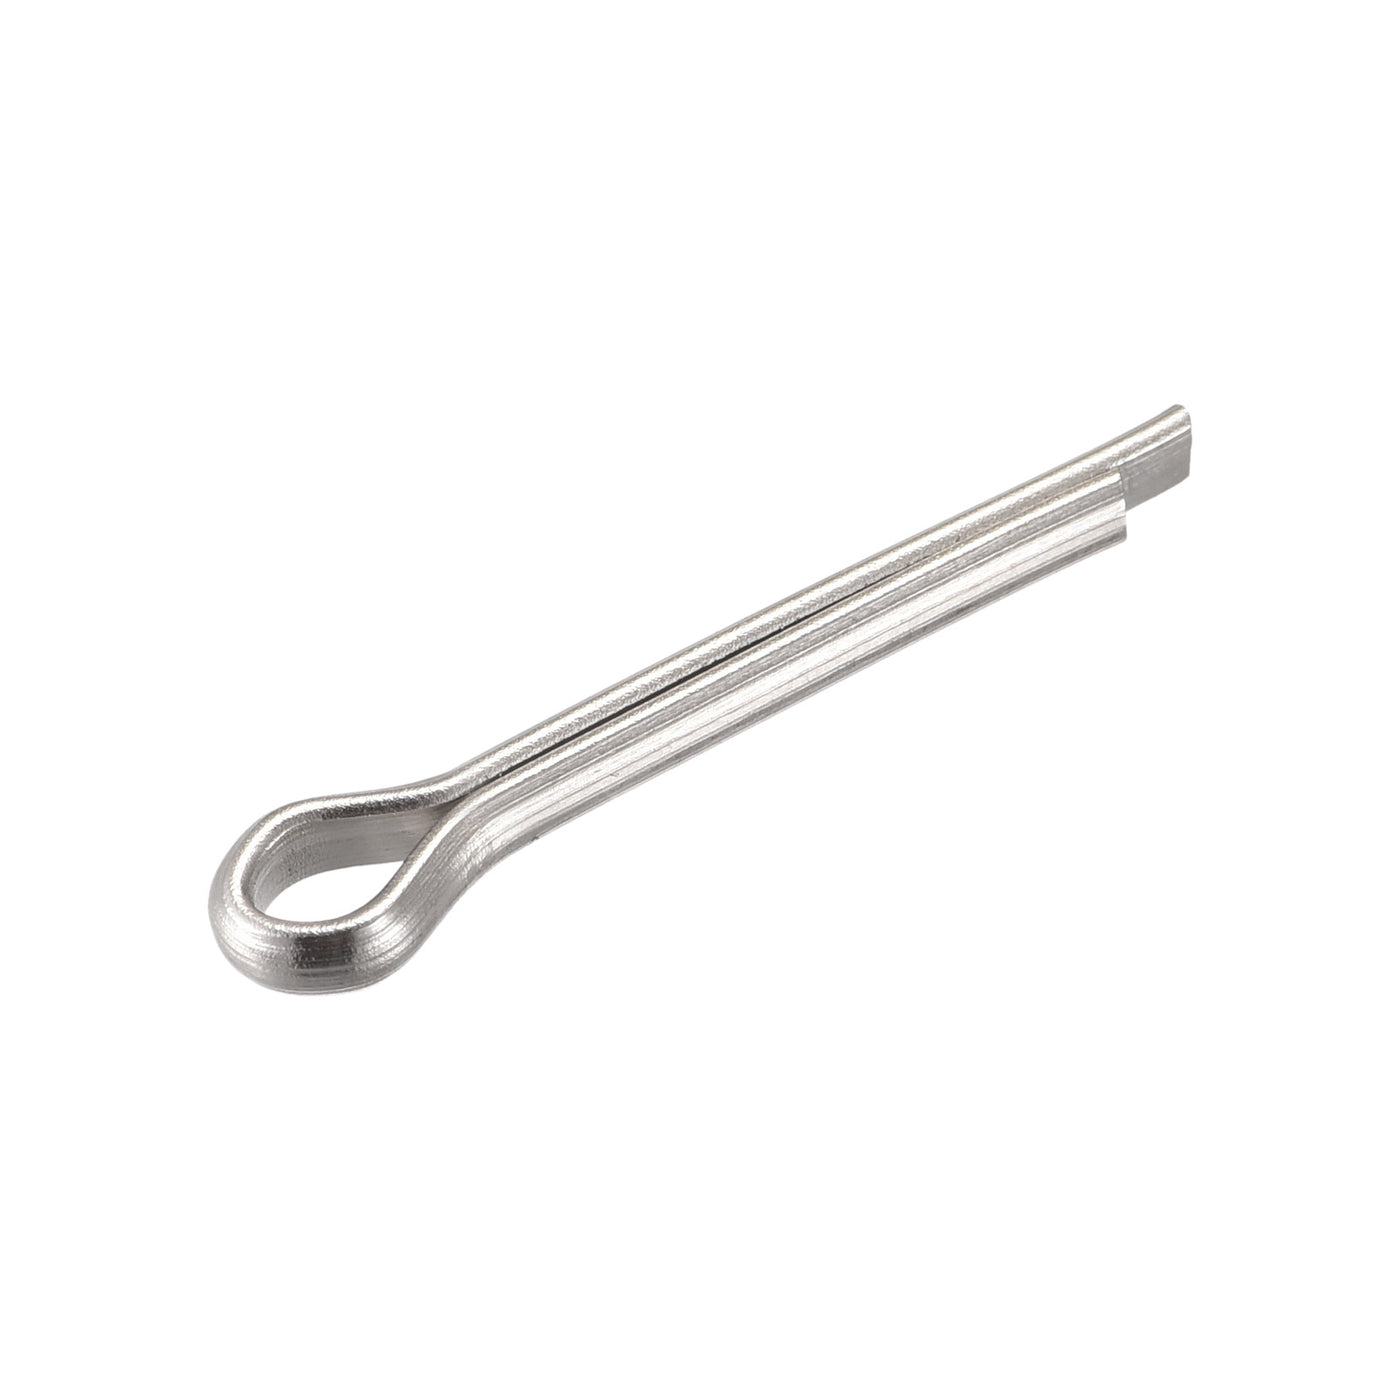 uxcell Uxcell Split Cotter Pin, 4mm x 20mm Stainless Steel Clip Fastener Fitting for Automotive, Mechanics, Silver Tone, 5Pcs